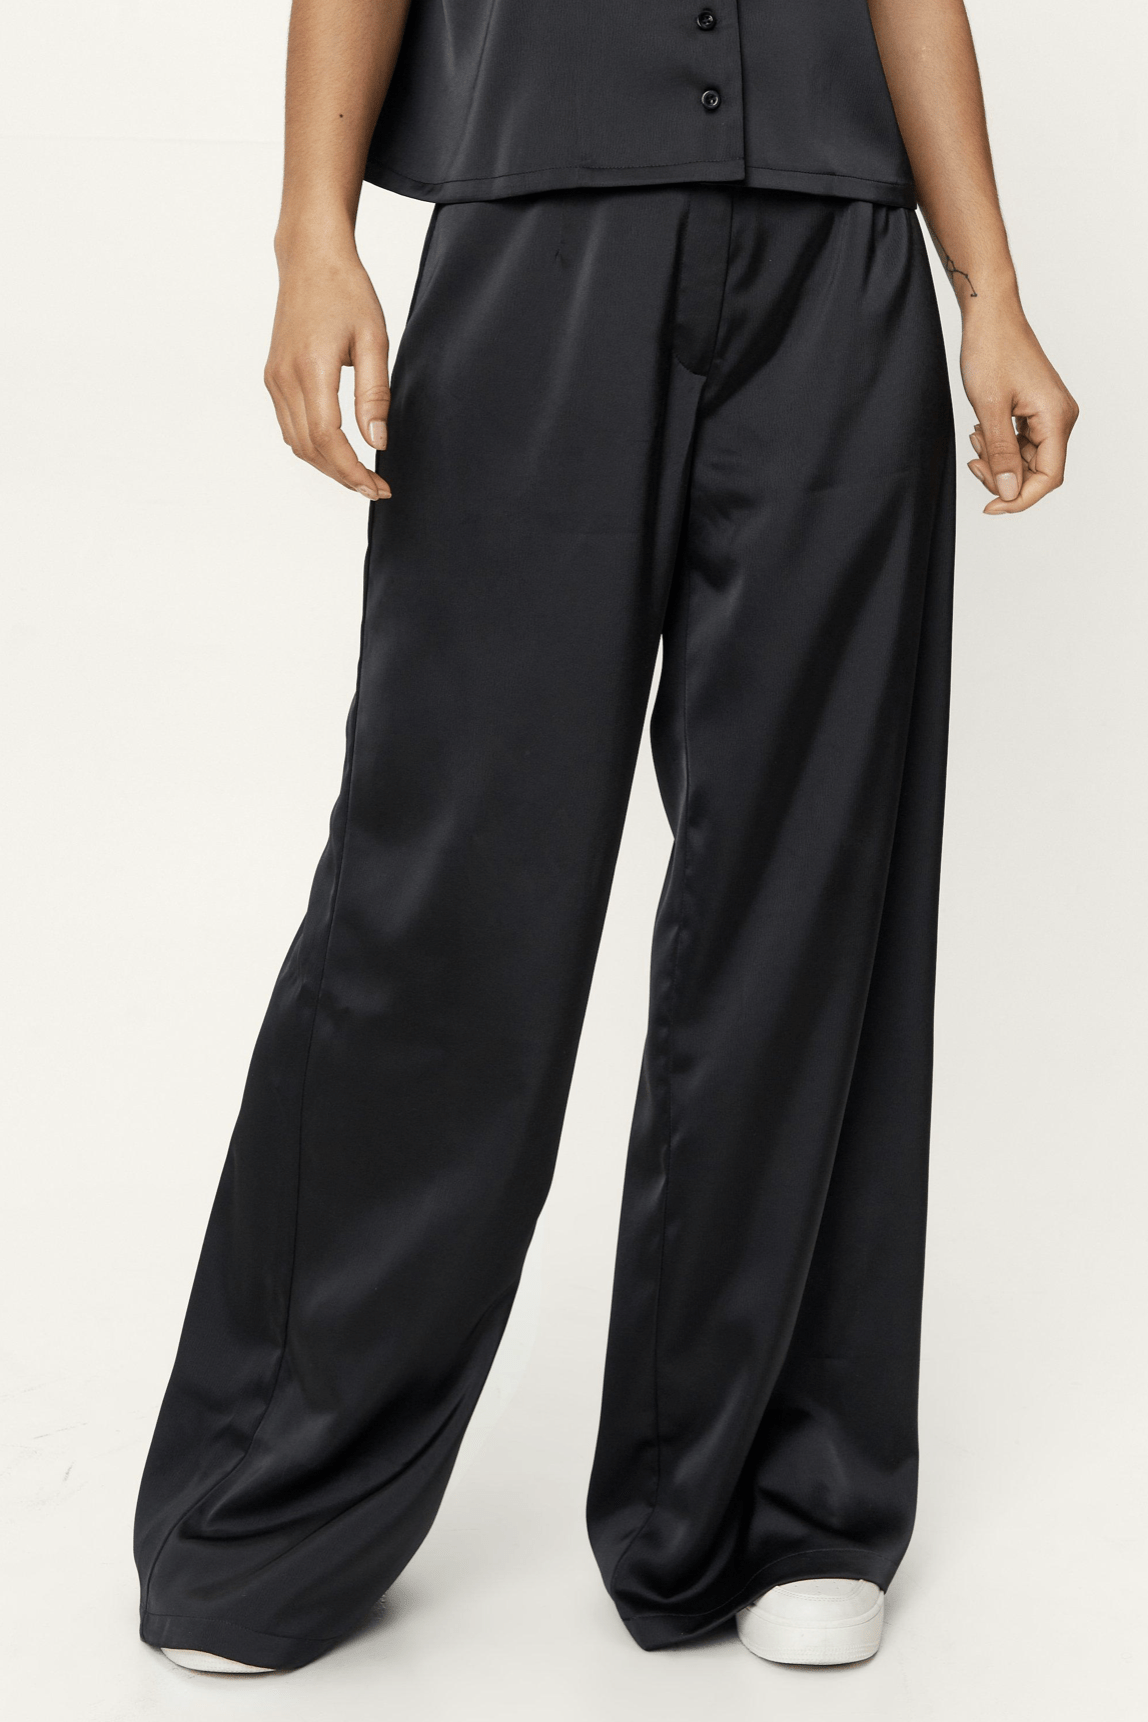 Details more than 58 black satin wide leg trousers - in.coedo.com.vn